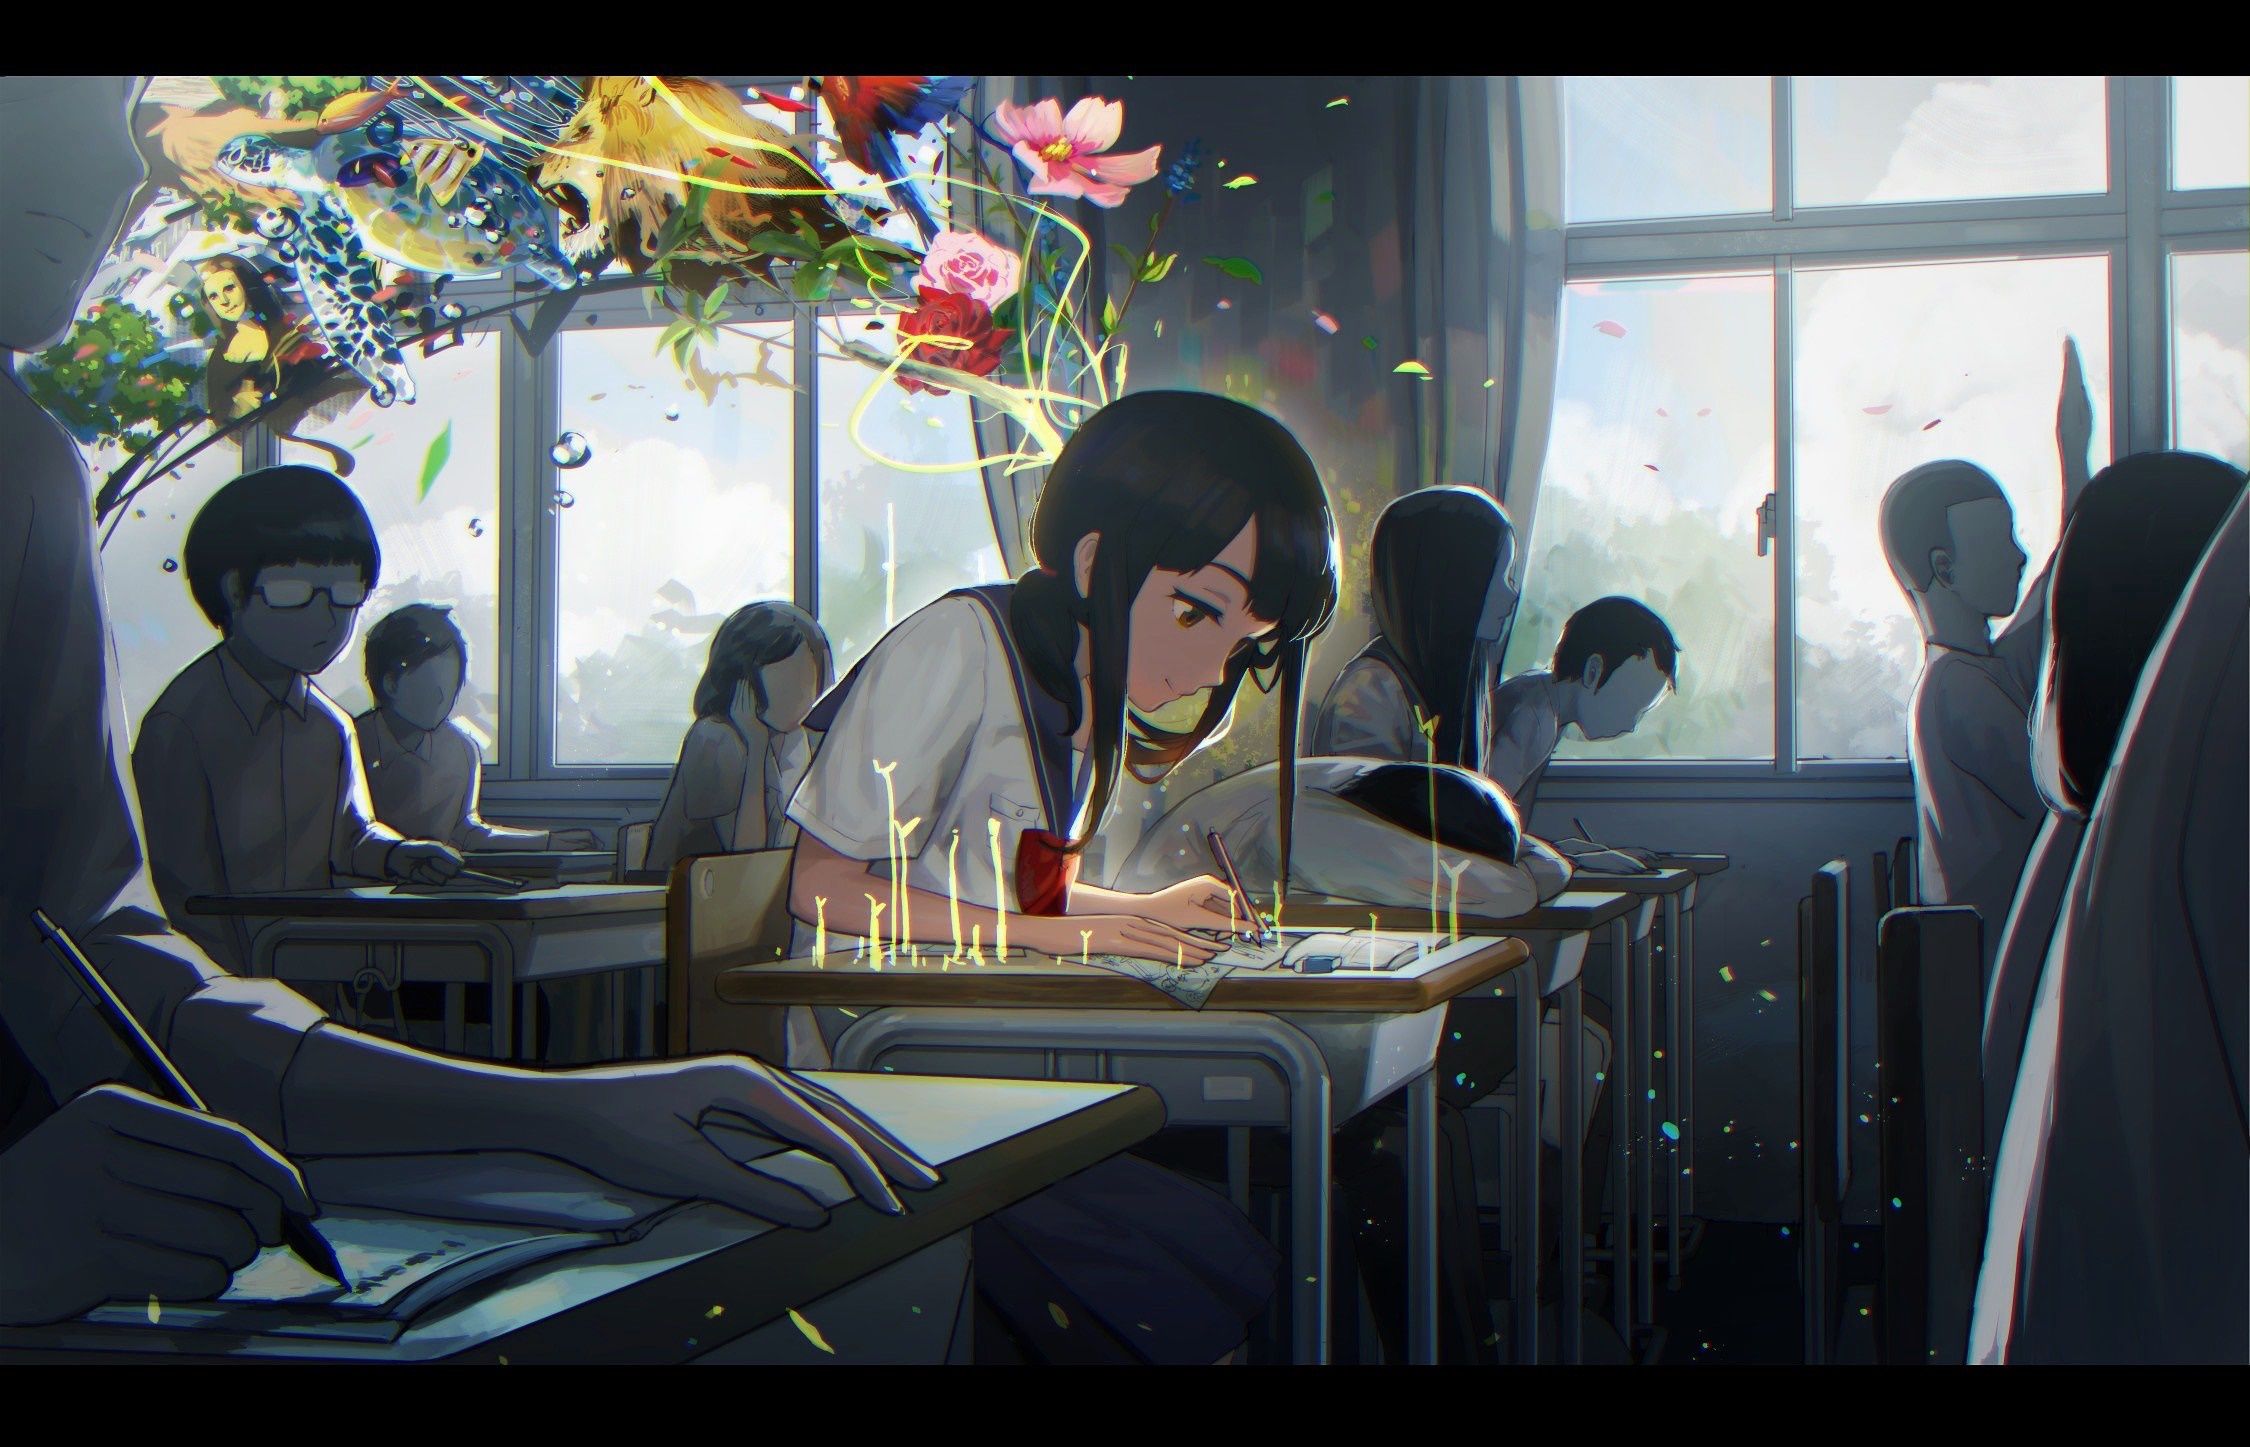 A girl is sitting at her desk with flowers on top of it - Study, school